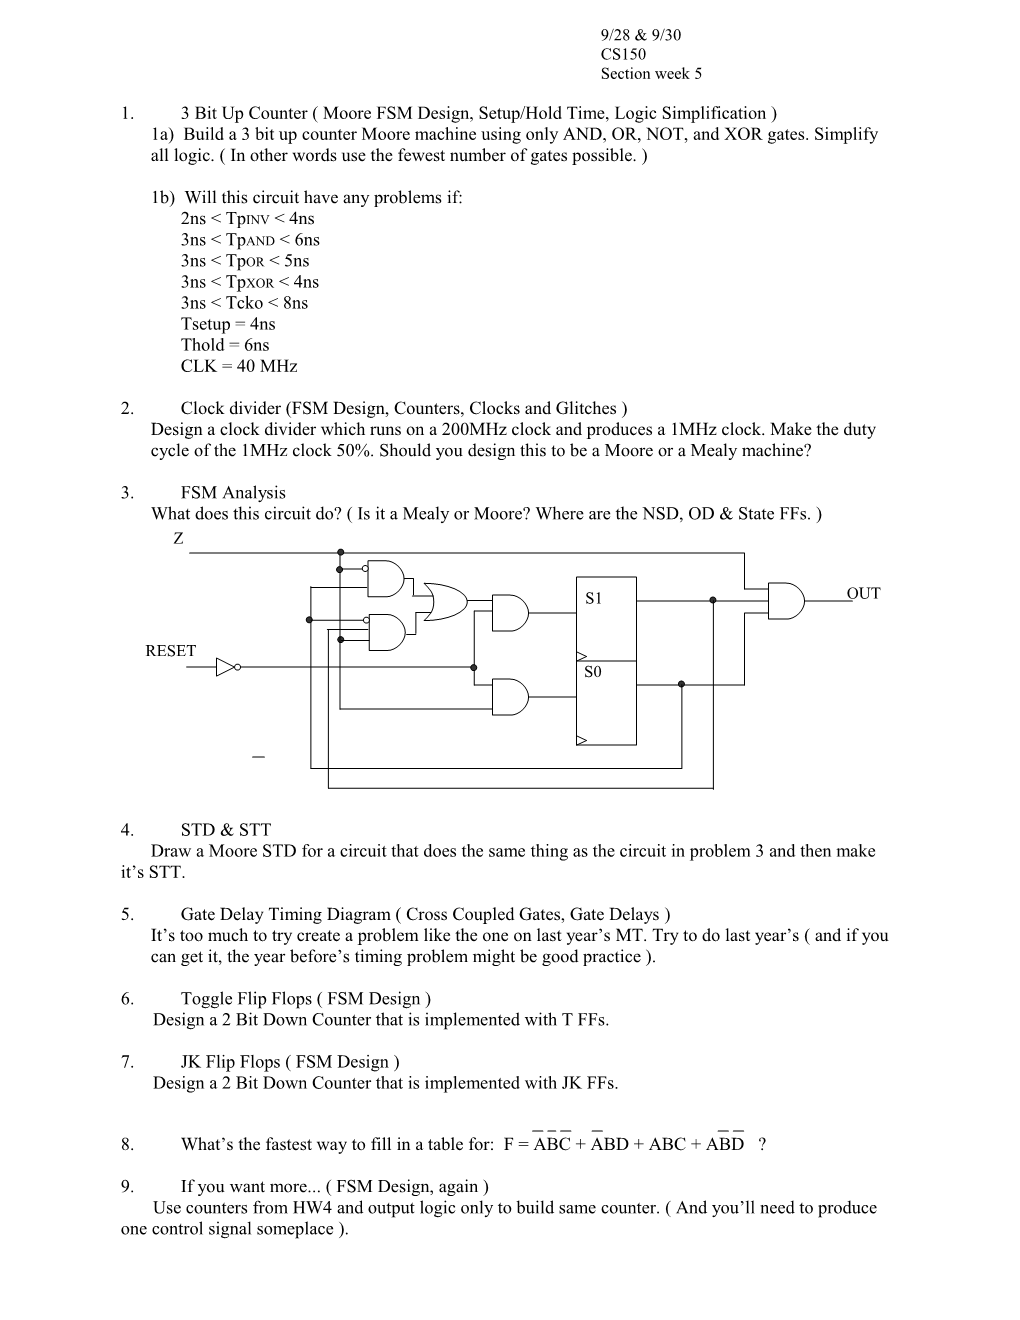 1B) Will This Circuit Have Any Problems If